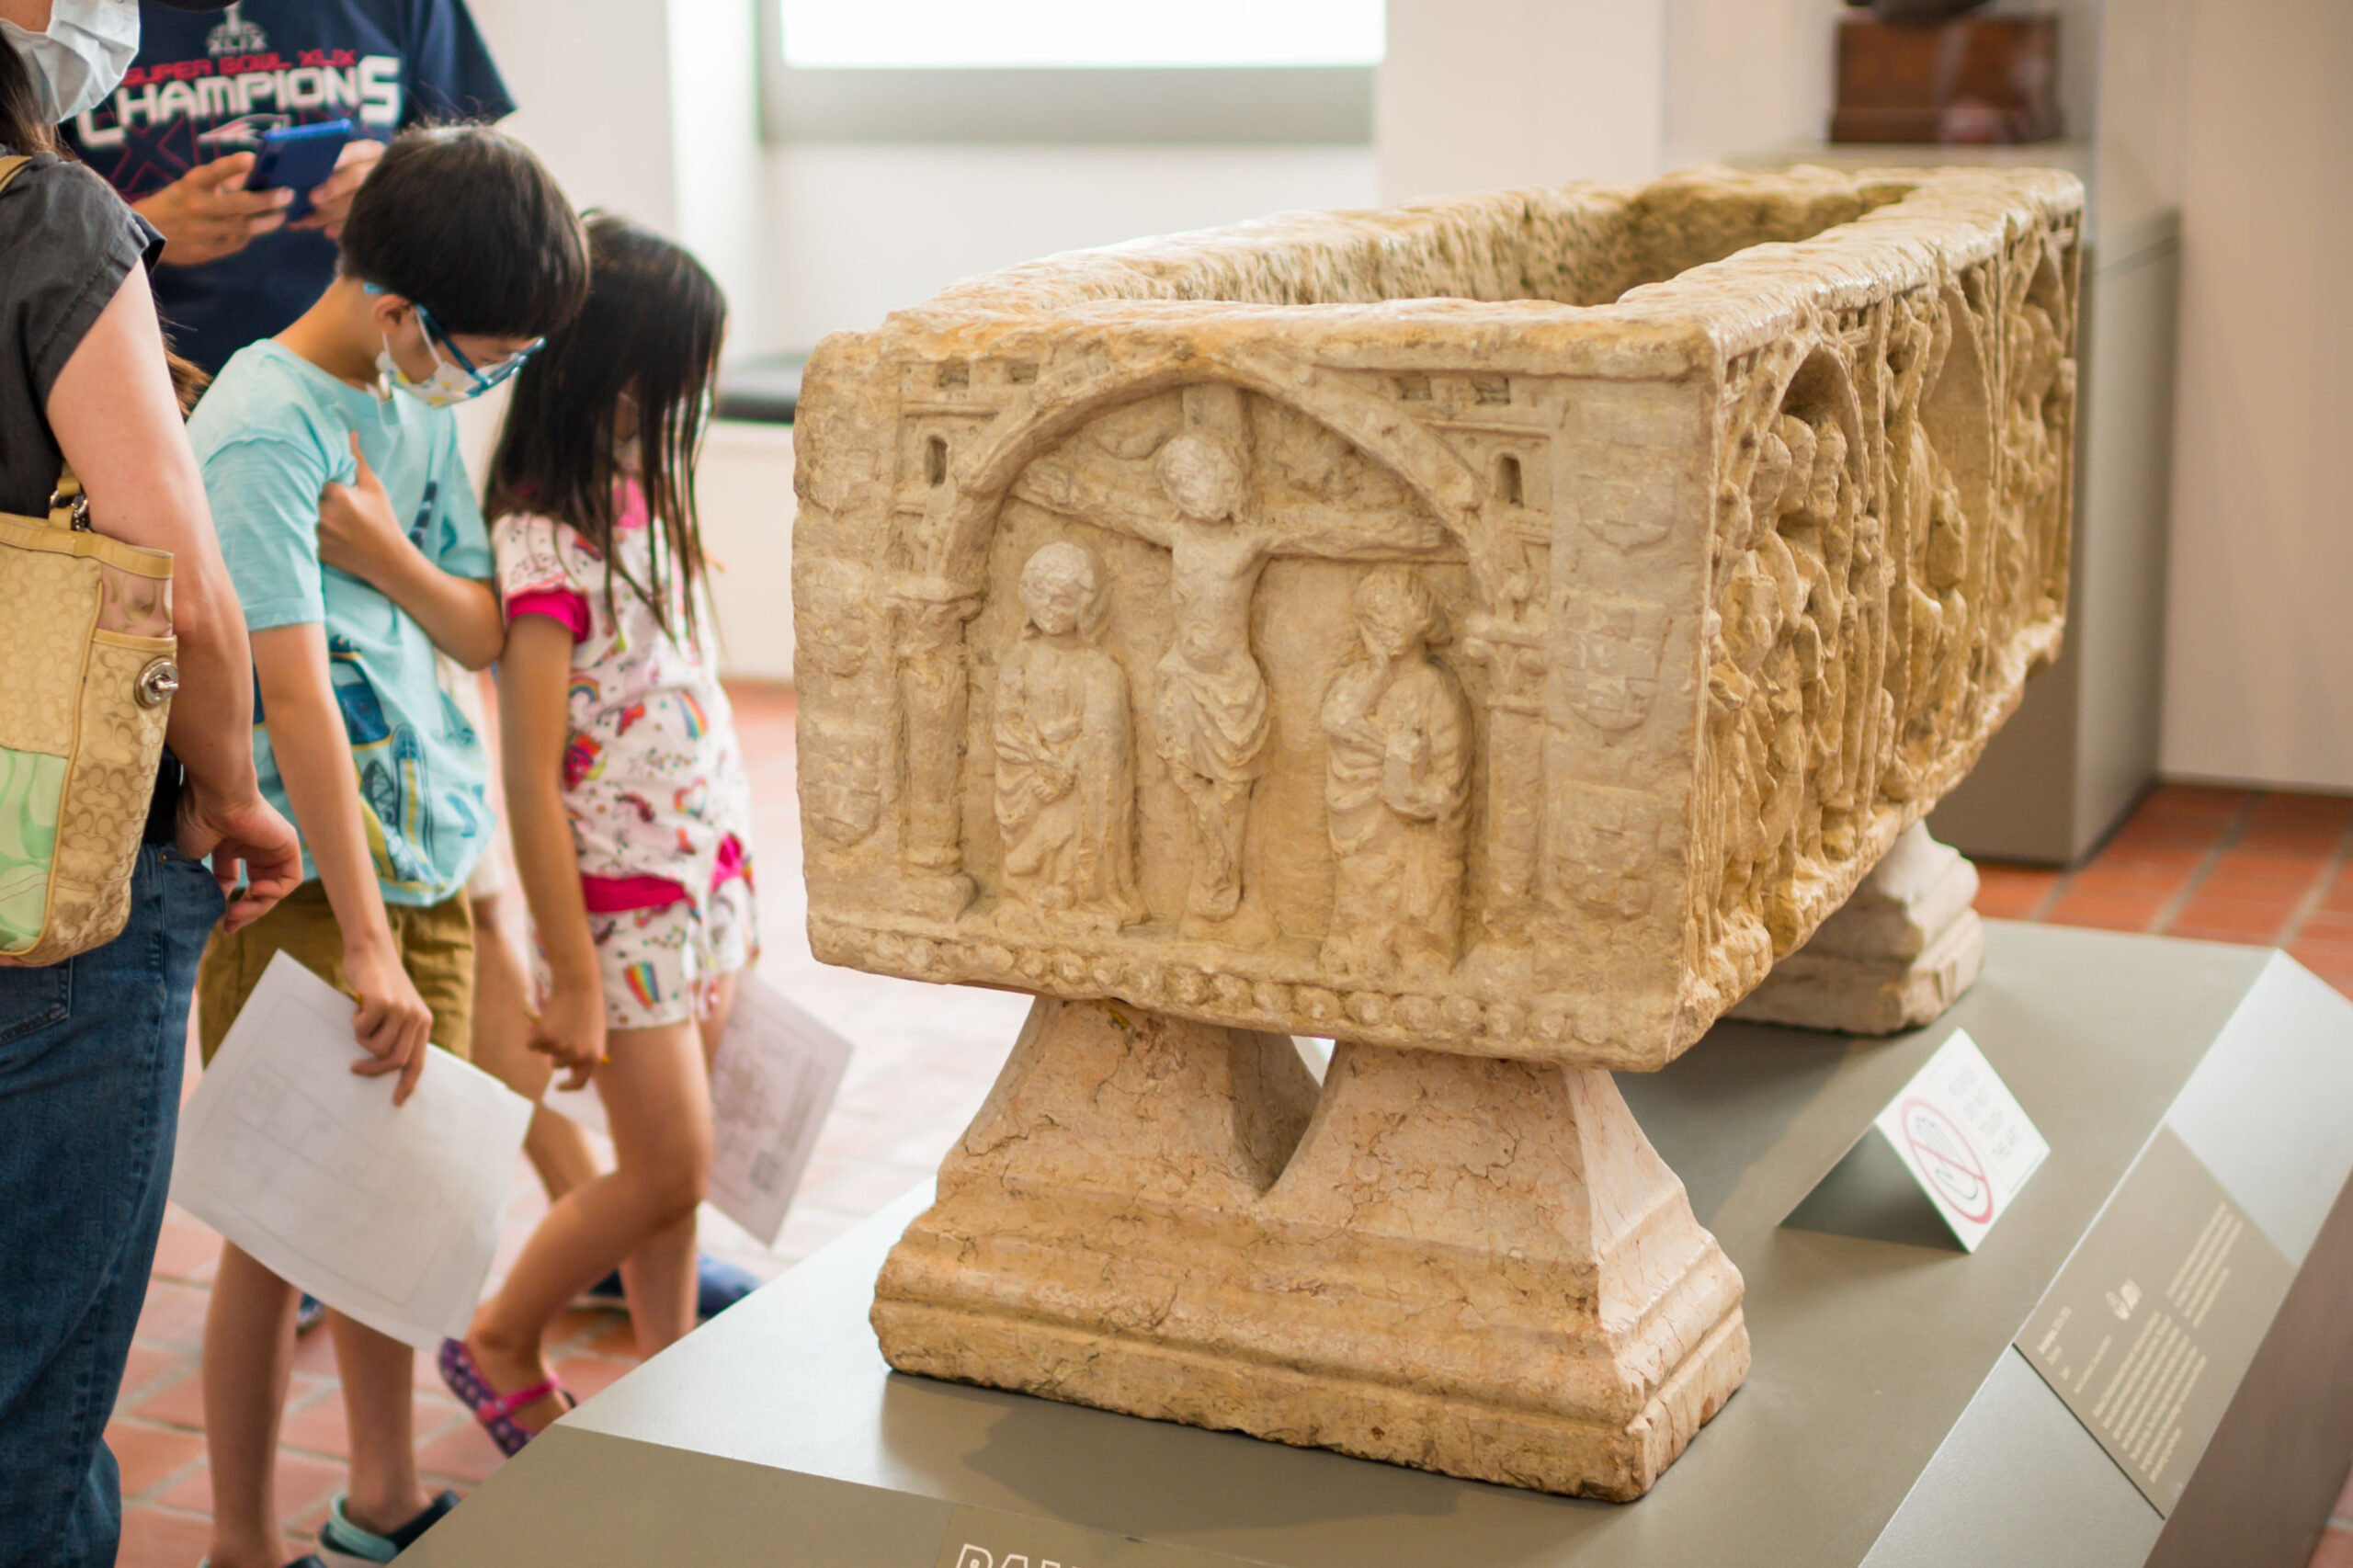 Young guests viewing a medieval sarcophagus